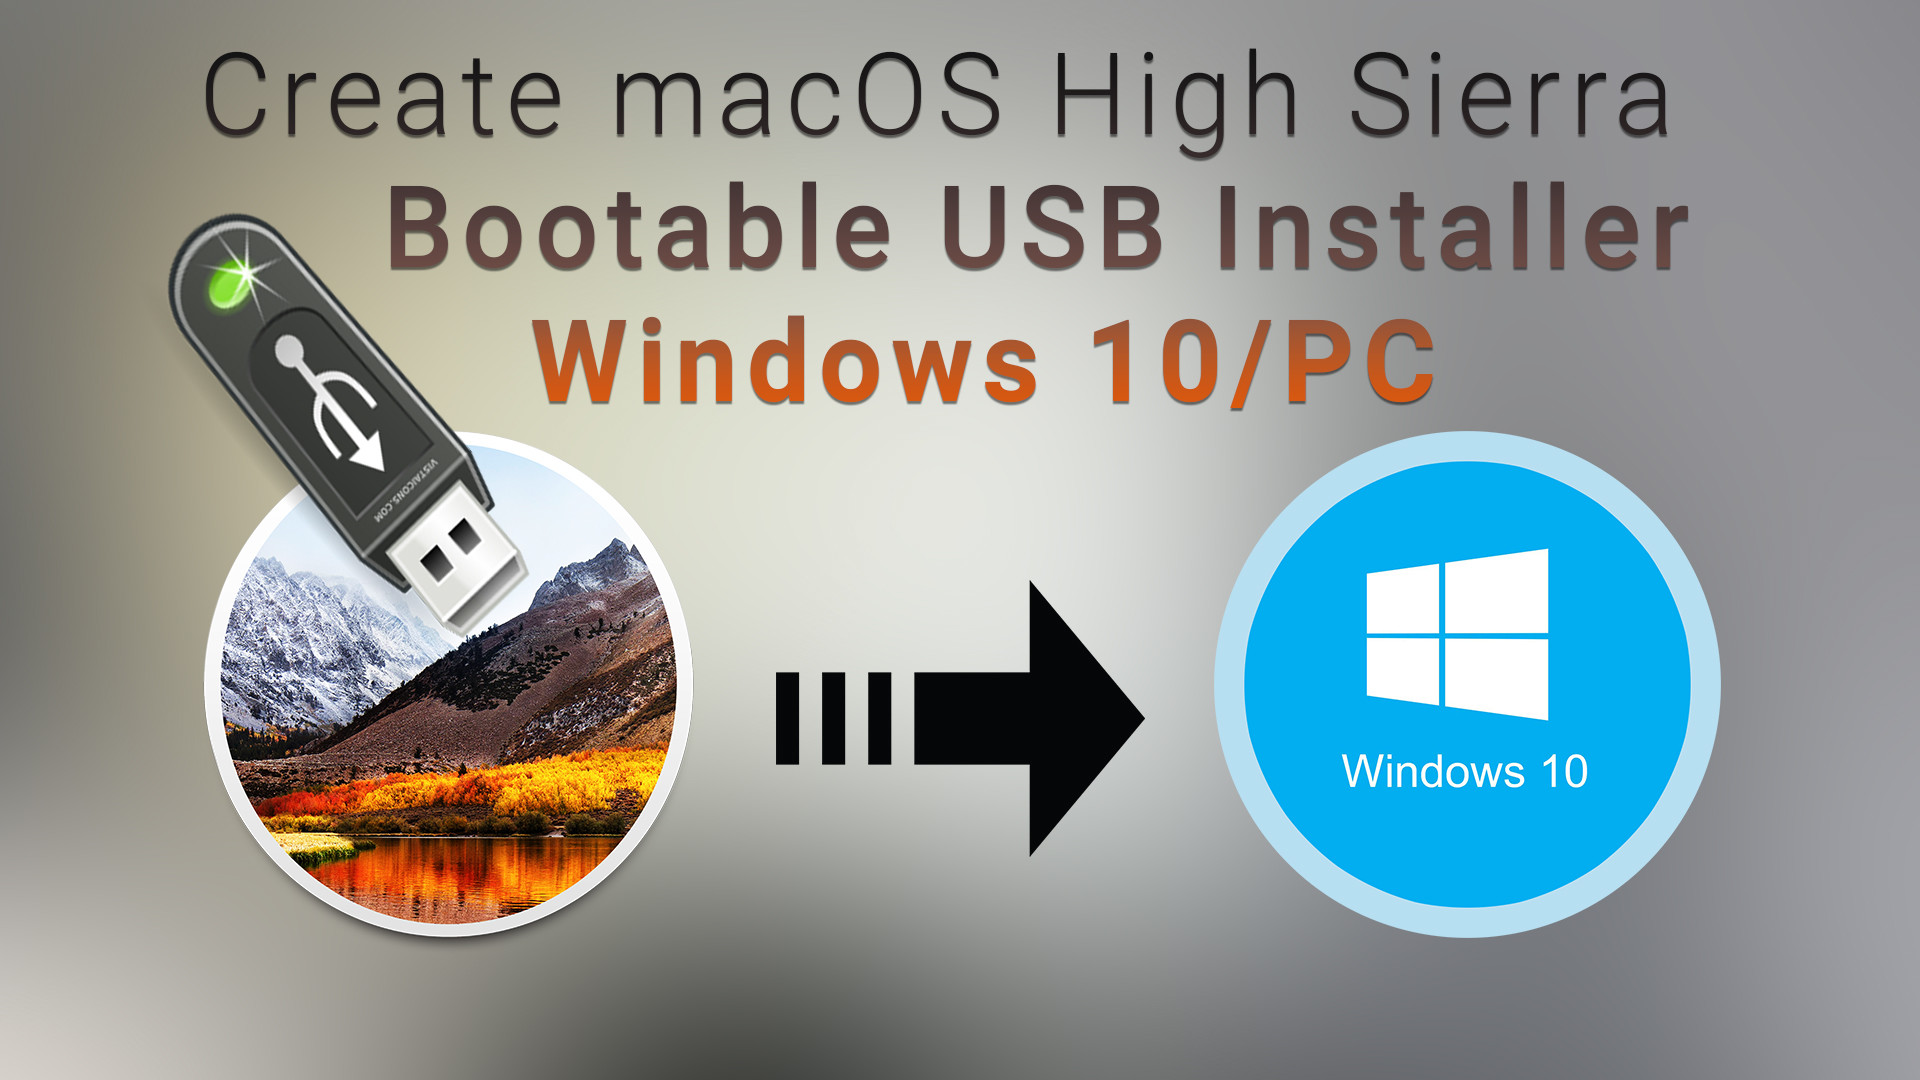 howto make a bootable usb for mac on winows